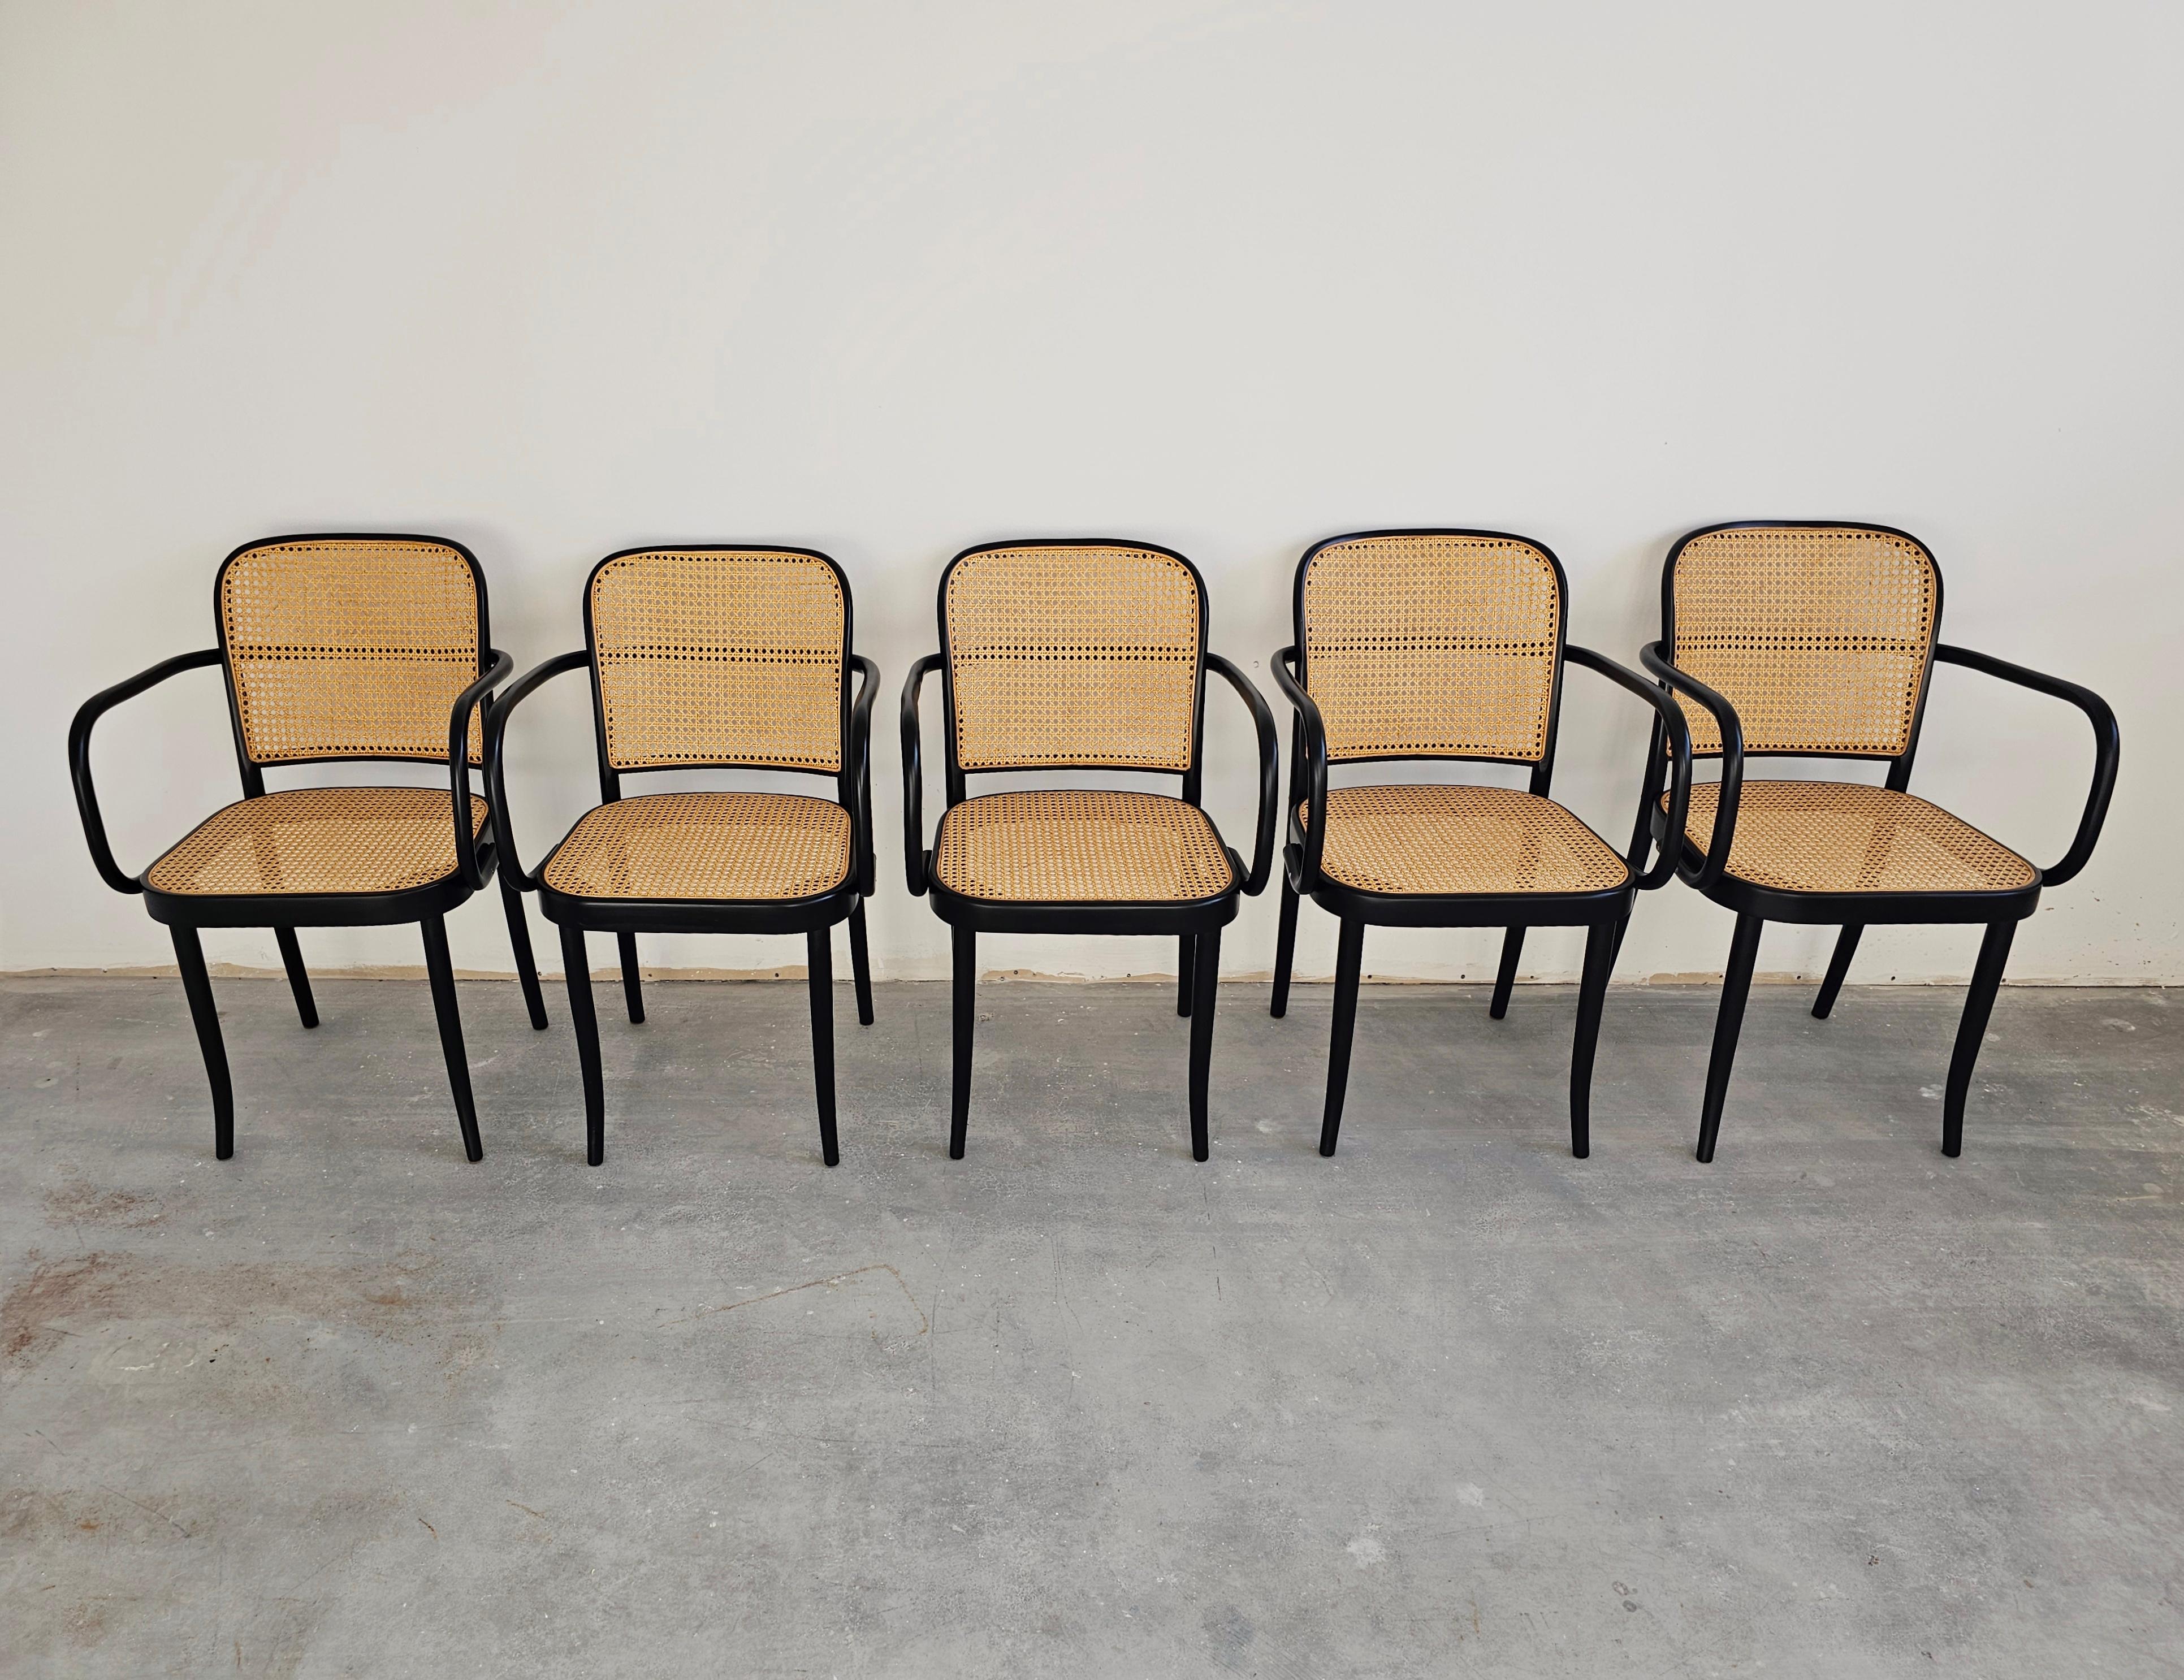 In this listing you will find rare vintage dining chairs designed by Josef Hoffmann for Mundus - Model Prague. Chairs are done in black painted beech bentwood with cane seats and backrest.

Chairs were manufactured by Mundus Varazdin in 1960s. Made